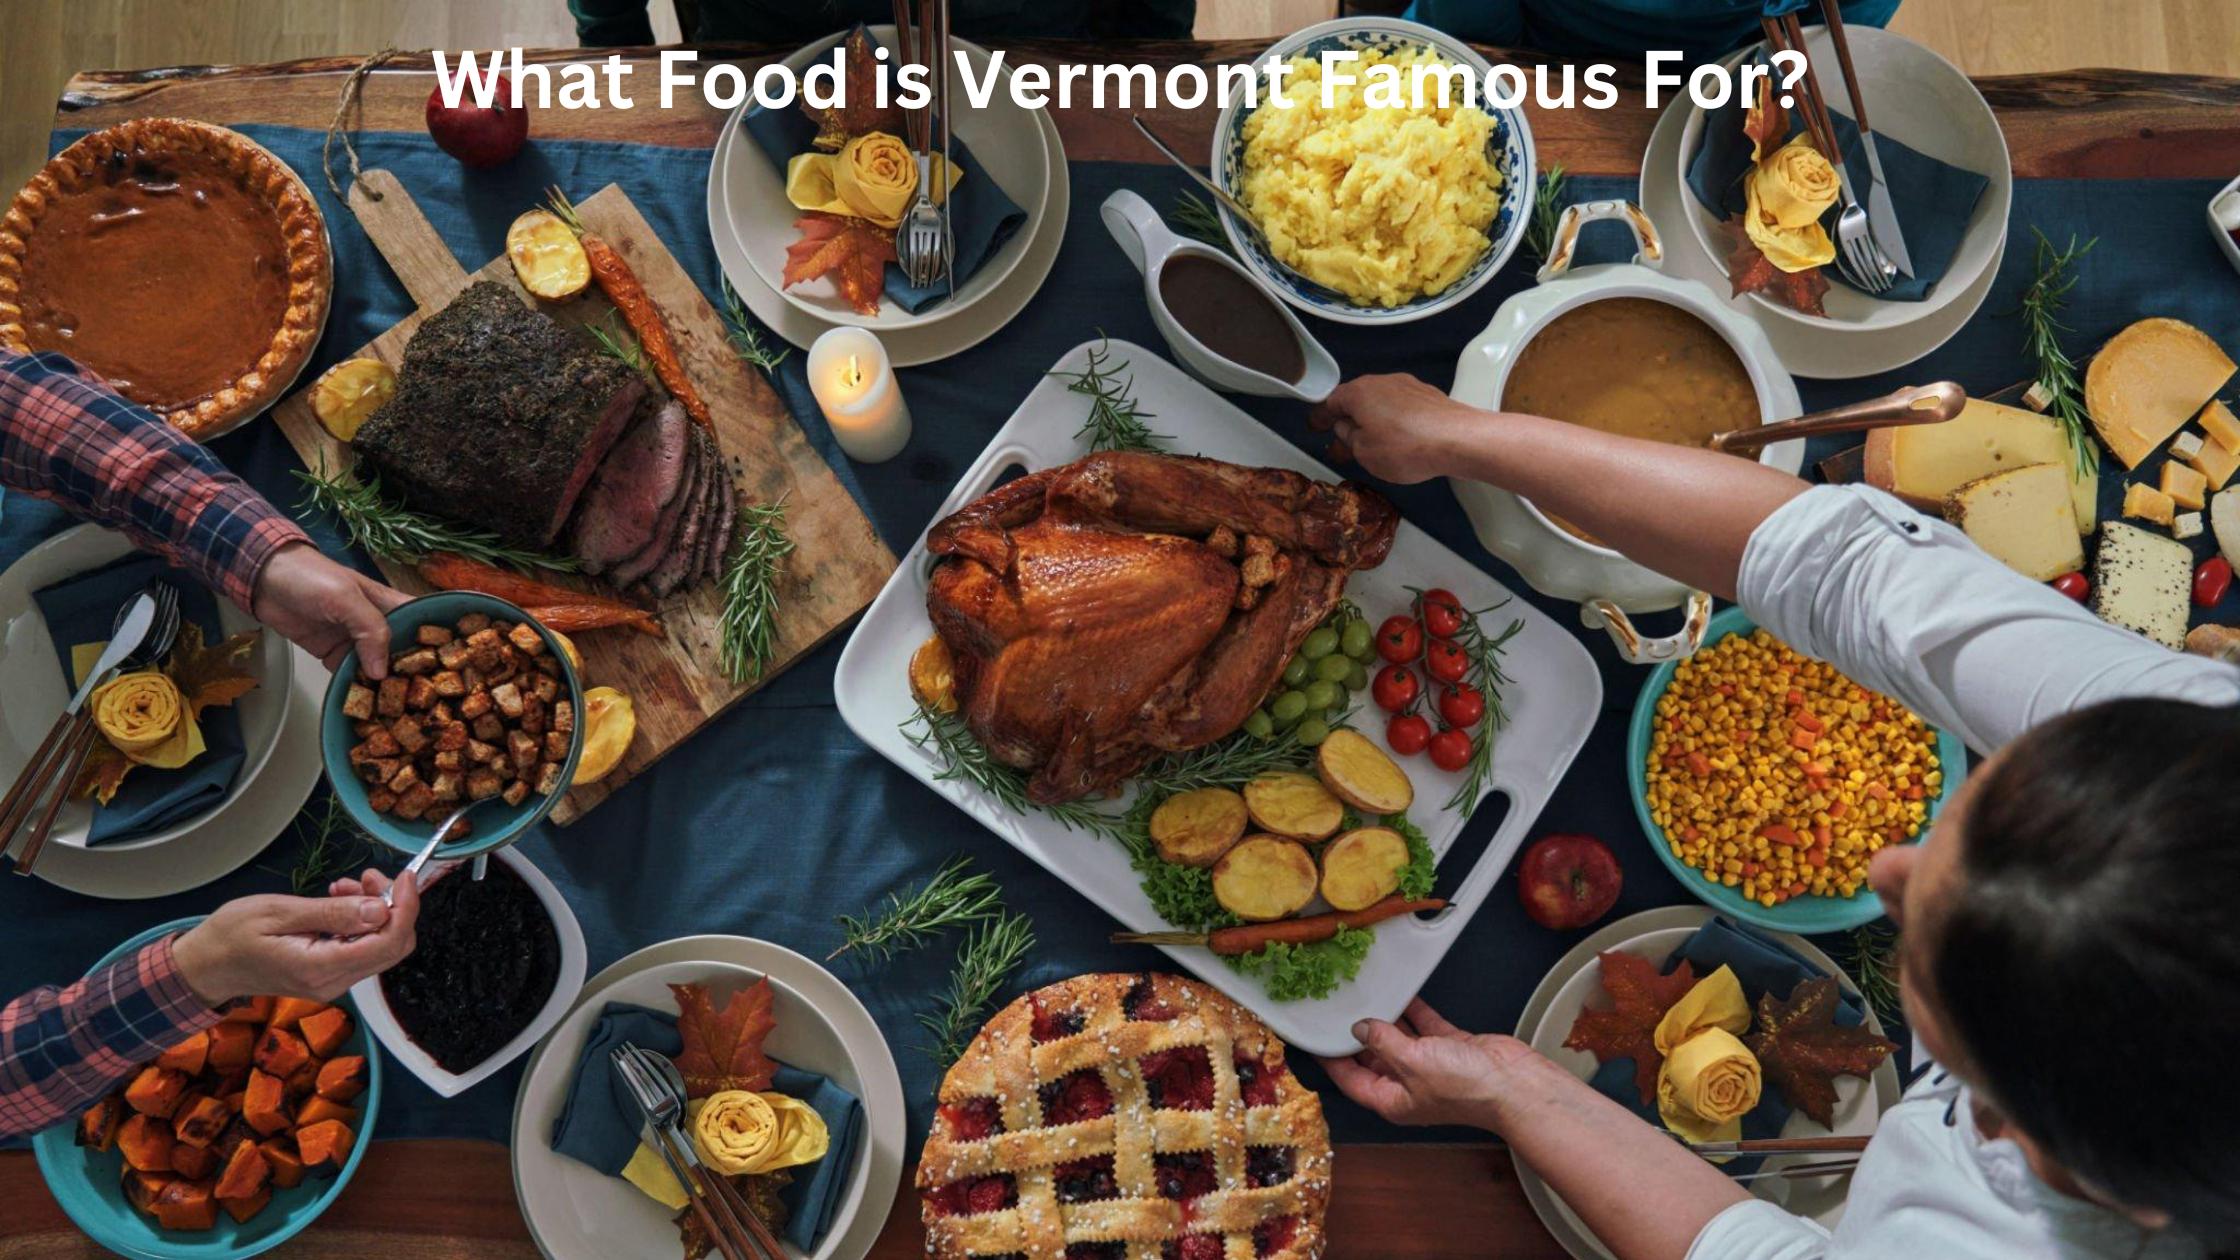 What Food is Vermont Famous For